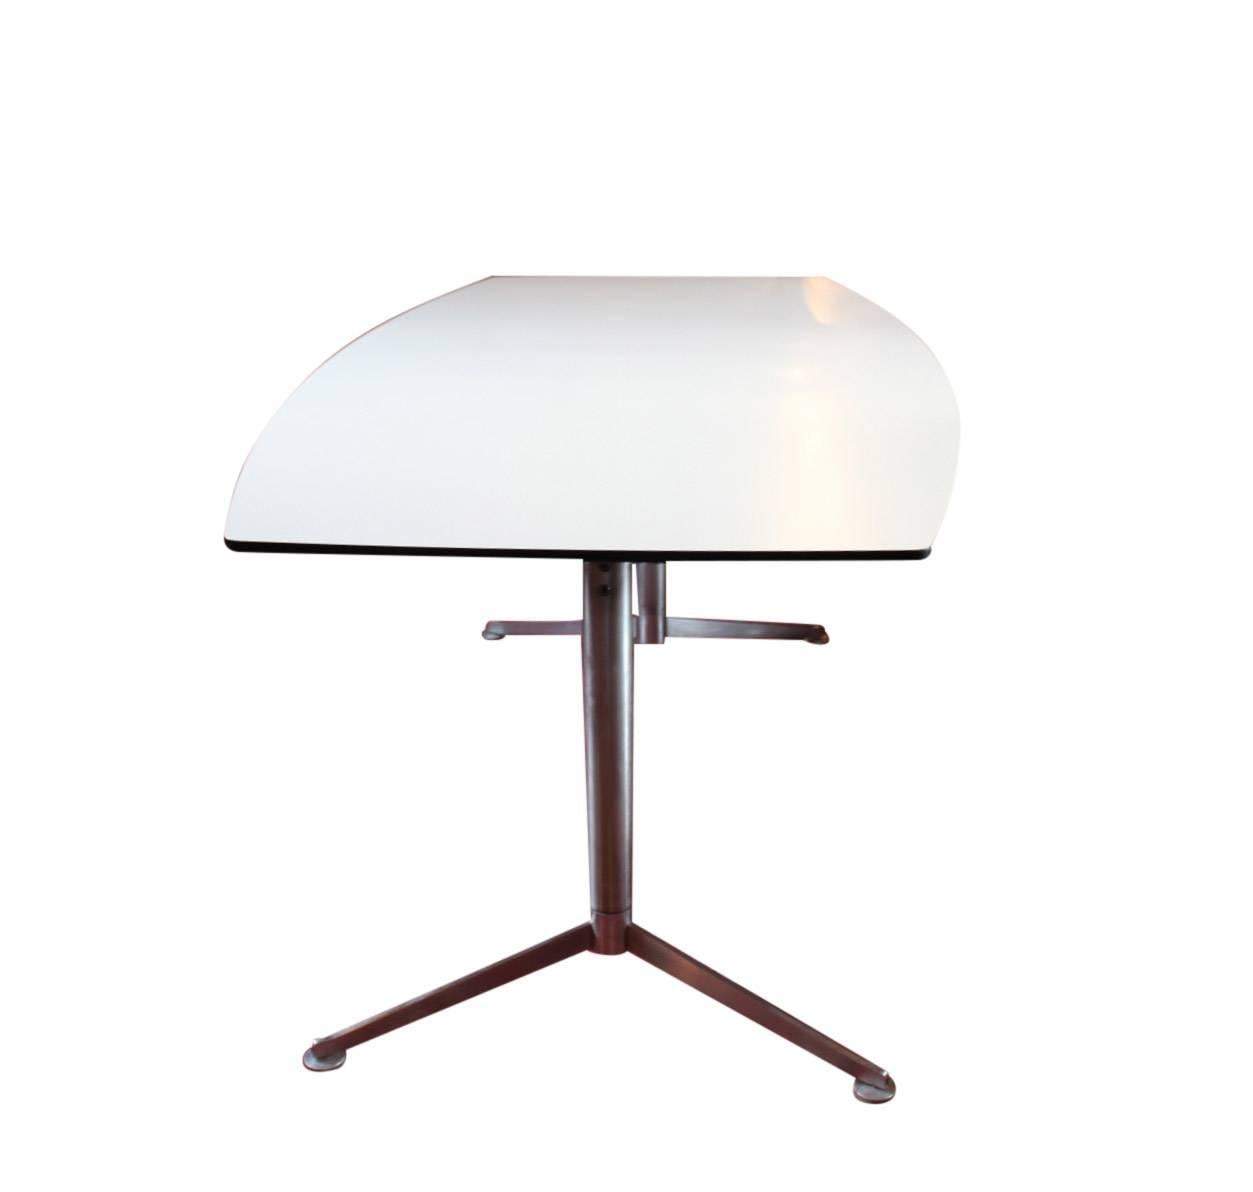 Eames segmented table designed by Charles & Ray Eames in 1964 and manufactured by Vitra in 2005. The table is with a tabletop of white laminate with a black edge.